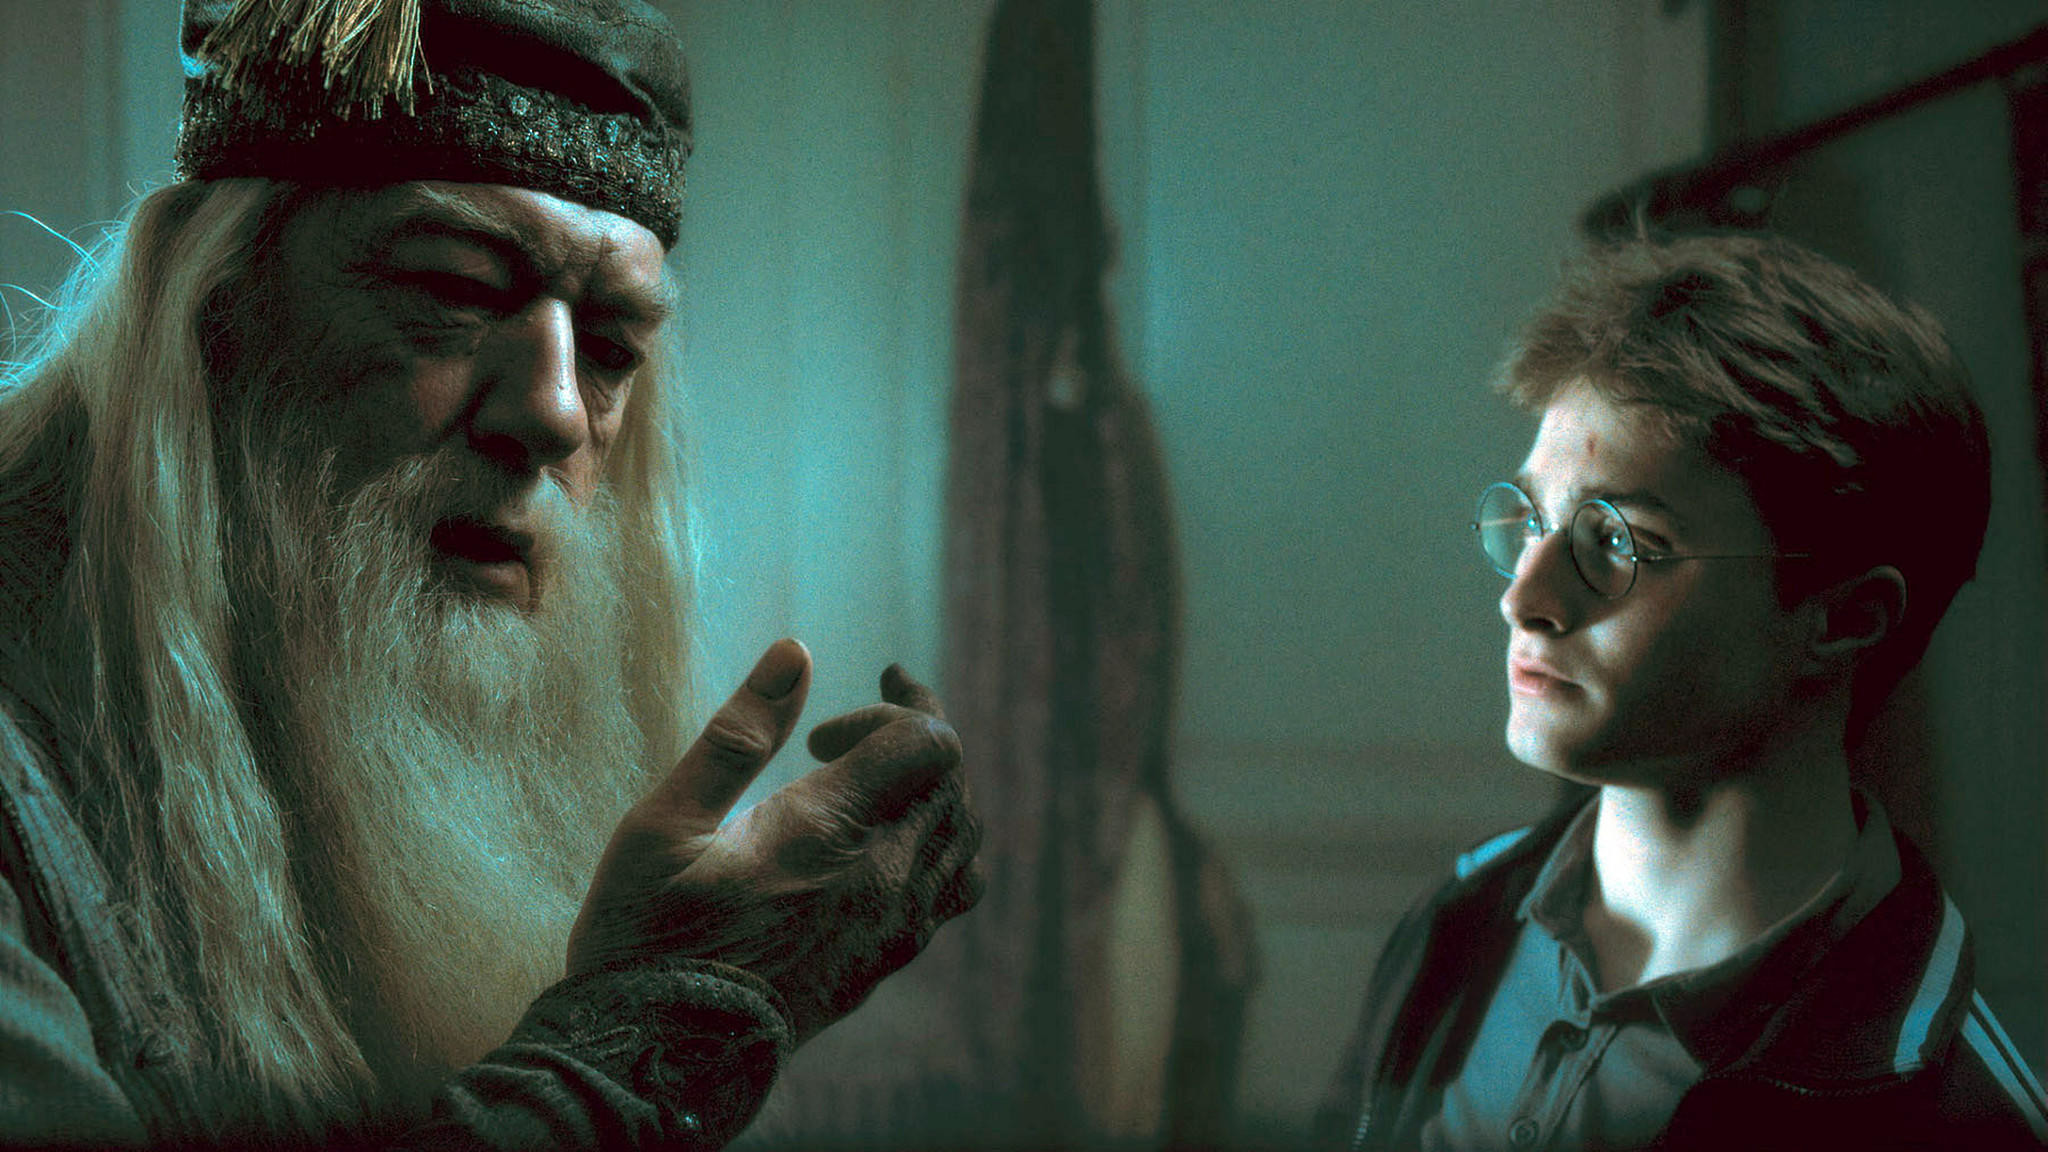 2048x1152 Michael Gambon, left, as Albus Dumbledore and Daniel Radcliffe as Harry  Potter in "